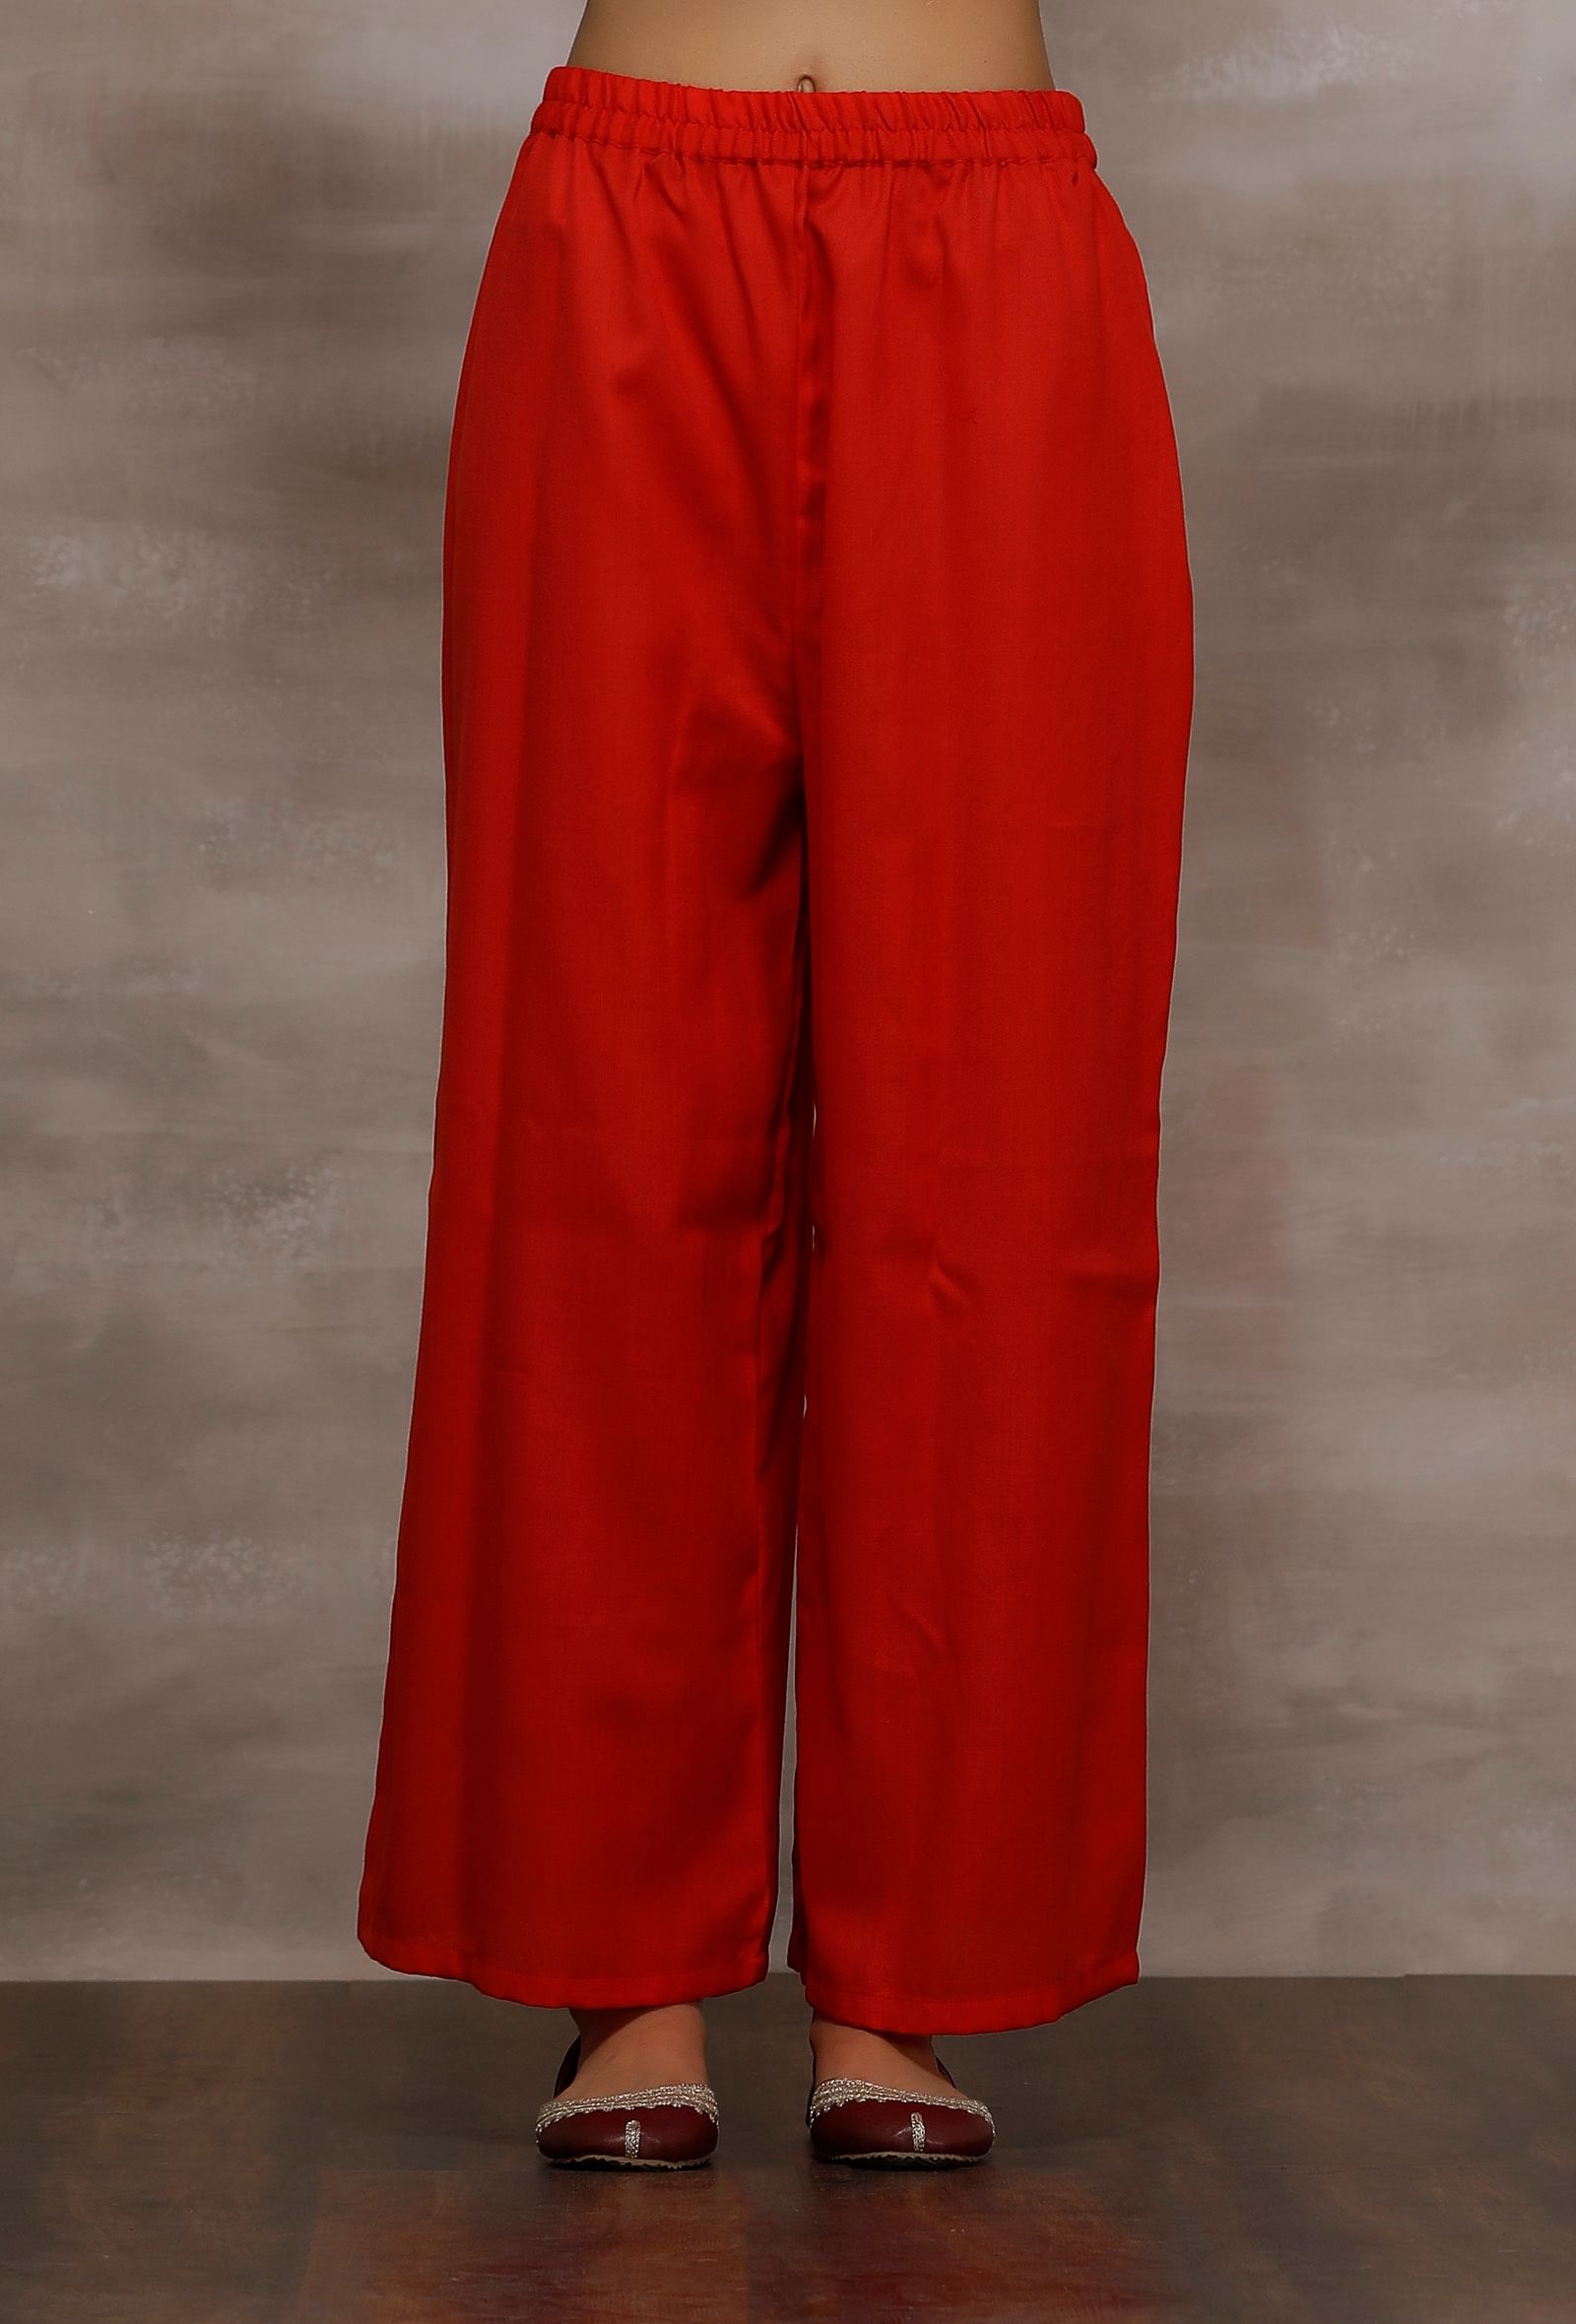 FFU Relaxed Women Red Trousers  Buy FFU Relaxed Women Red Trousers Online  at Best Prices in India  Flipkartcom